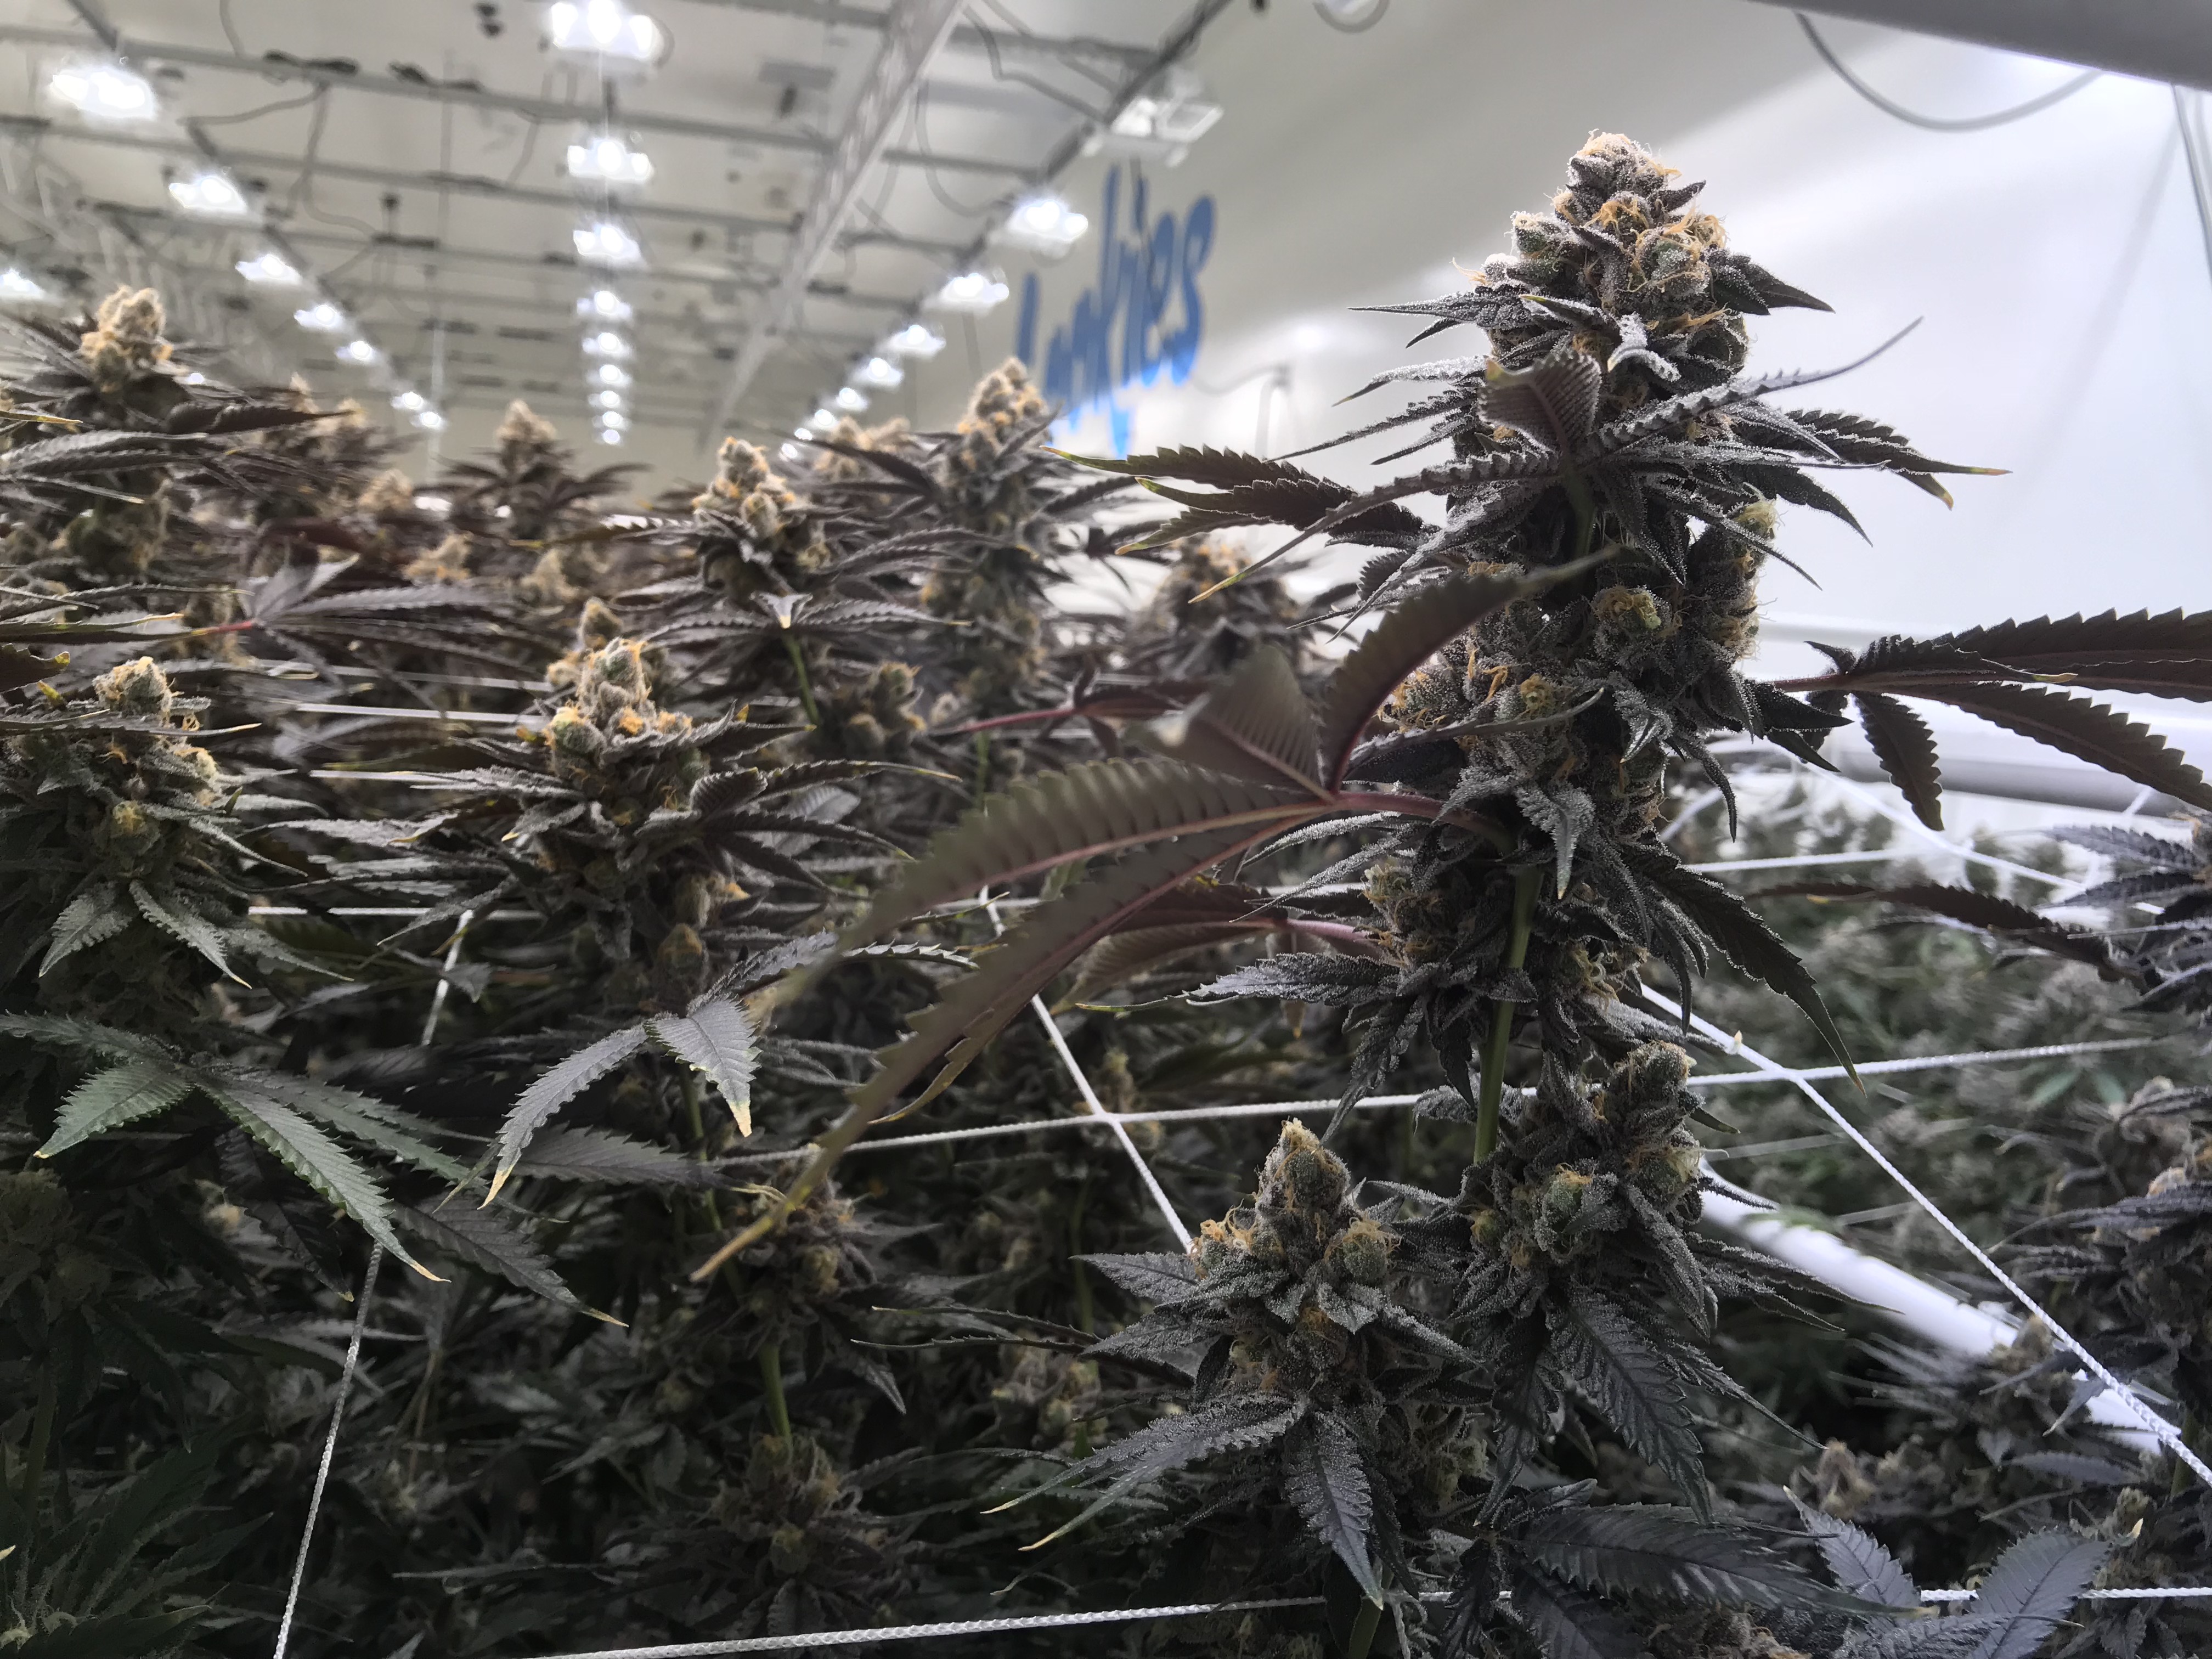 Cookies Focuses on Systems Integration and Crop Protection to Deliver Top Quality Flower